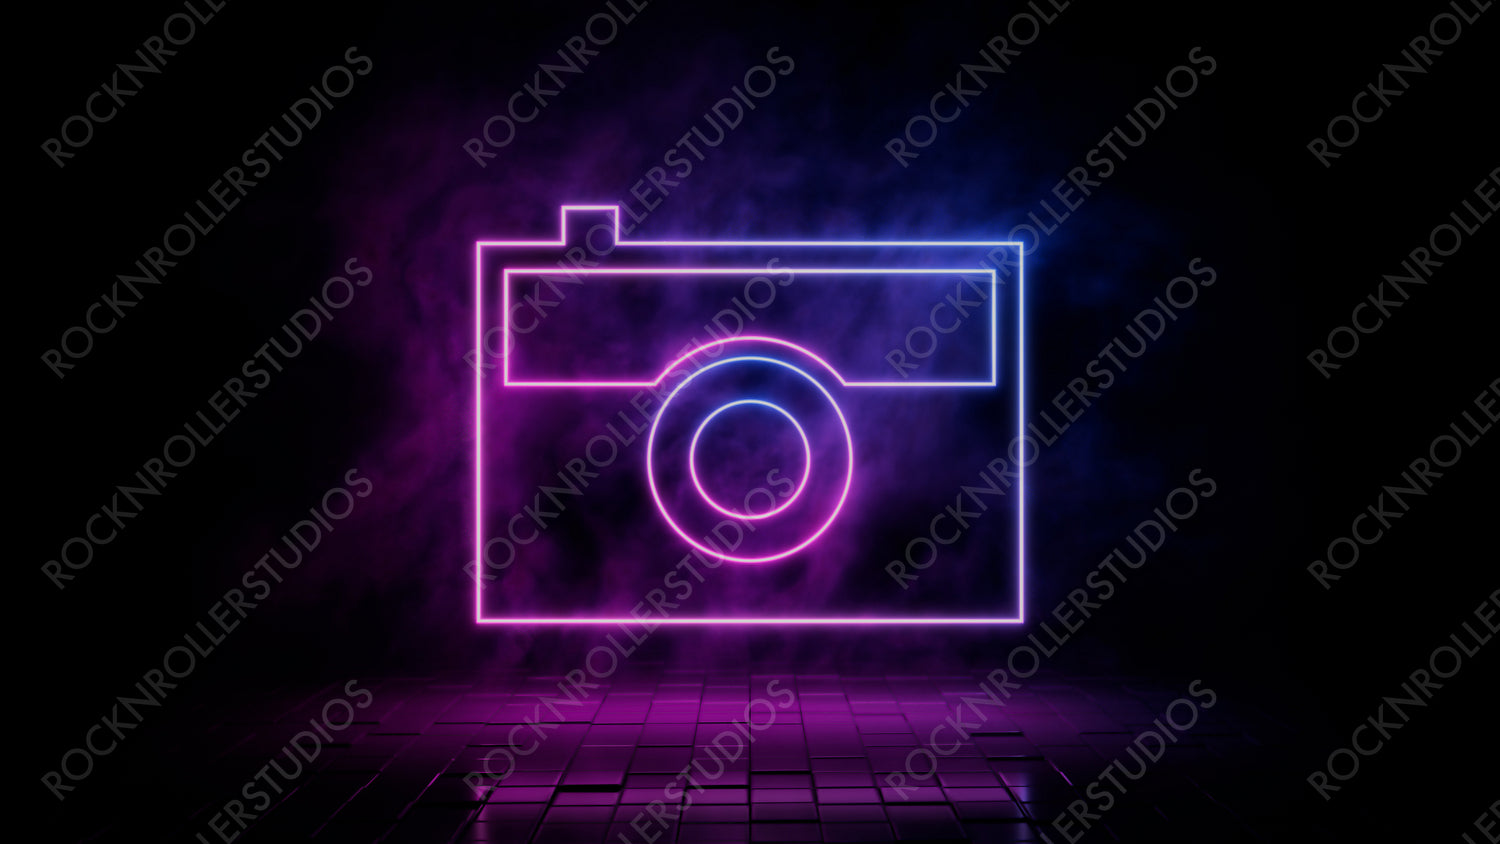 Pink and blue neon light camera icon. Vibrant colored photo technology symbol, isolated on a black background. 3D Render